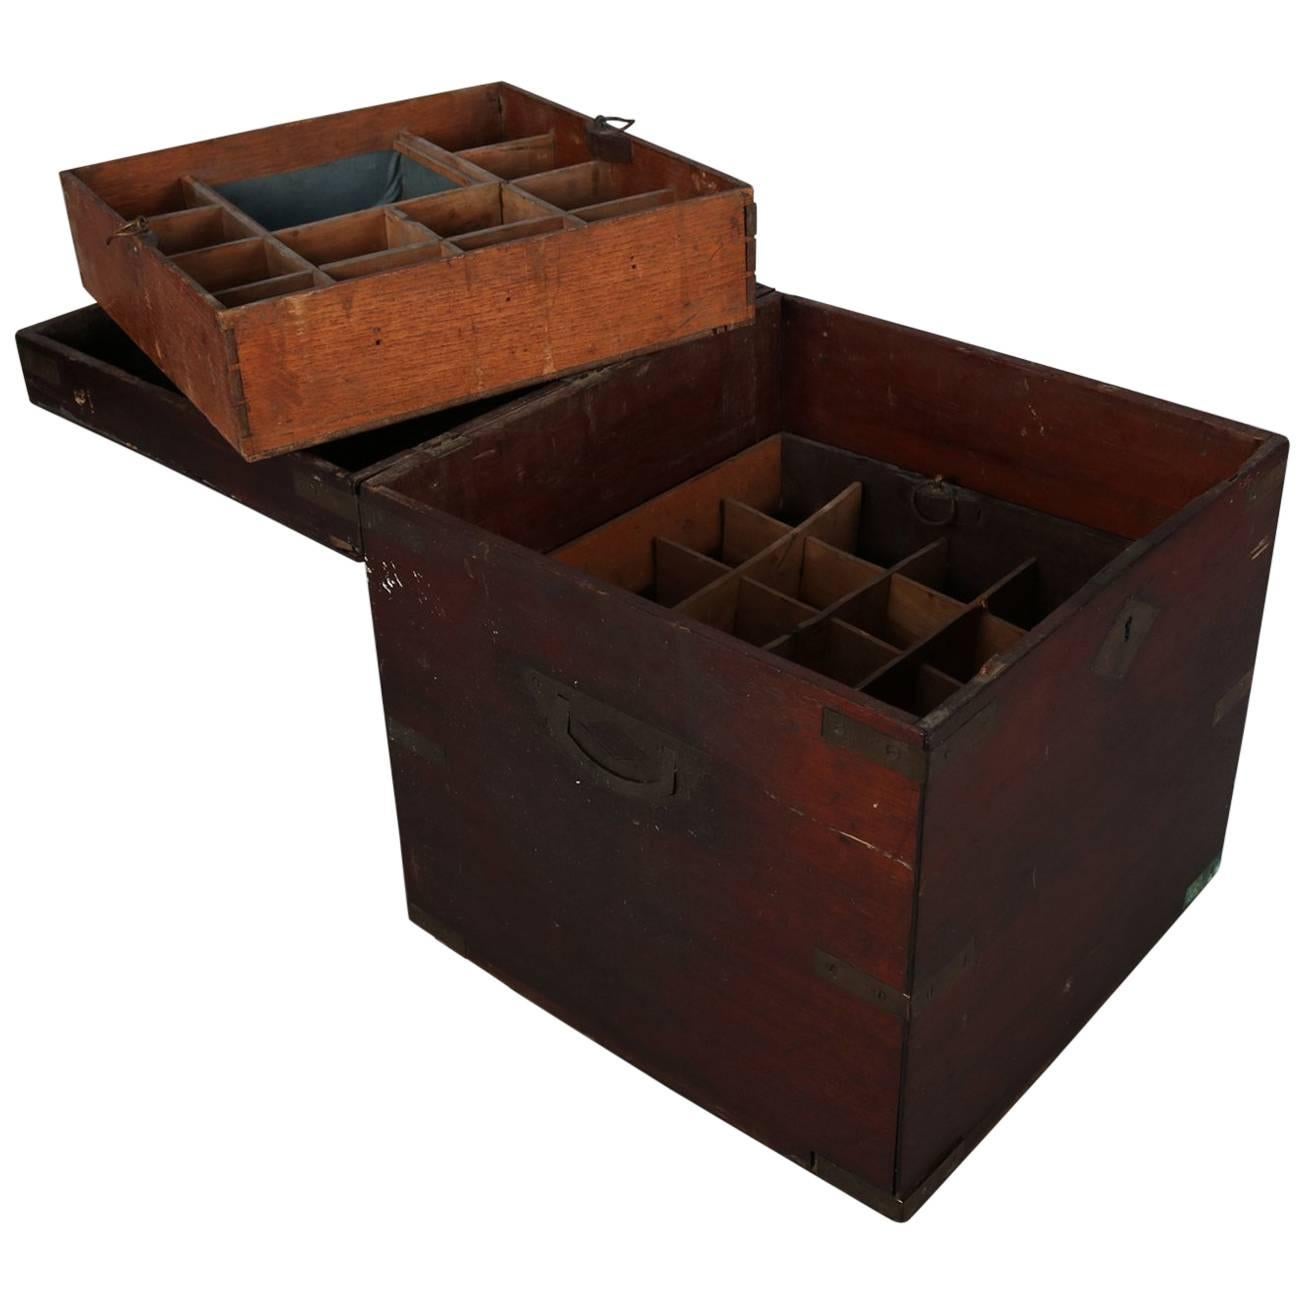 Antique Apothecary Handled Storage Box with Interior Tray, 19th Century